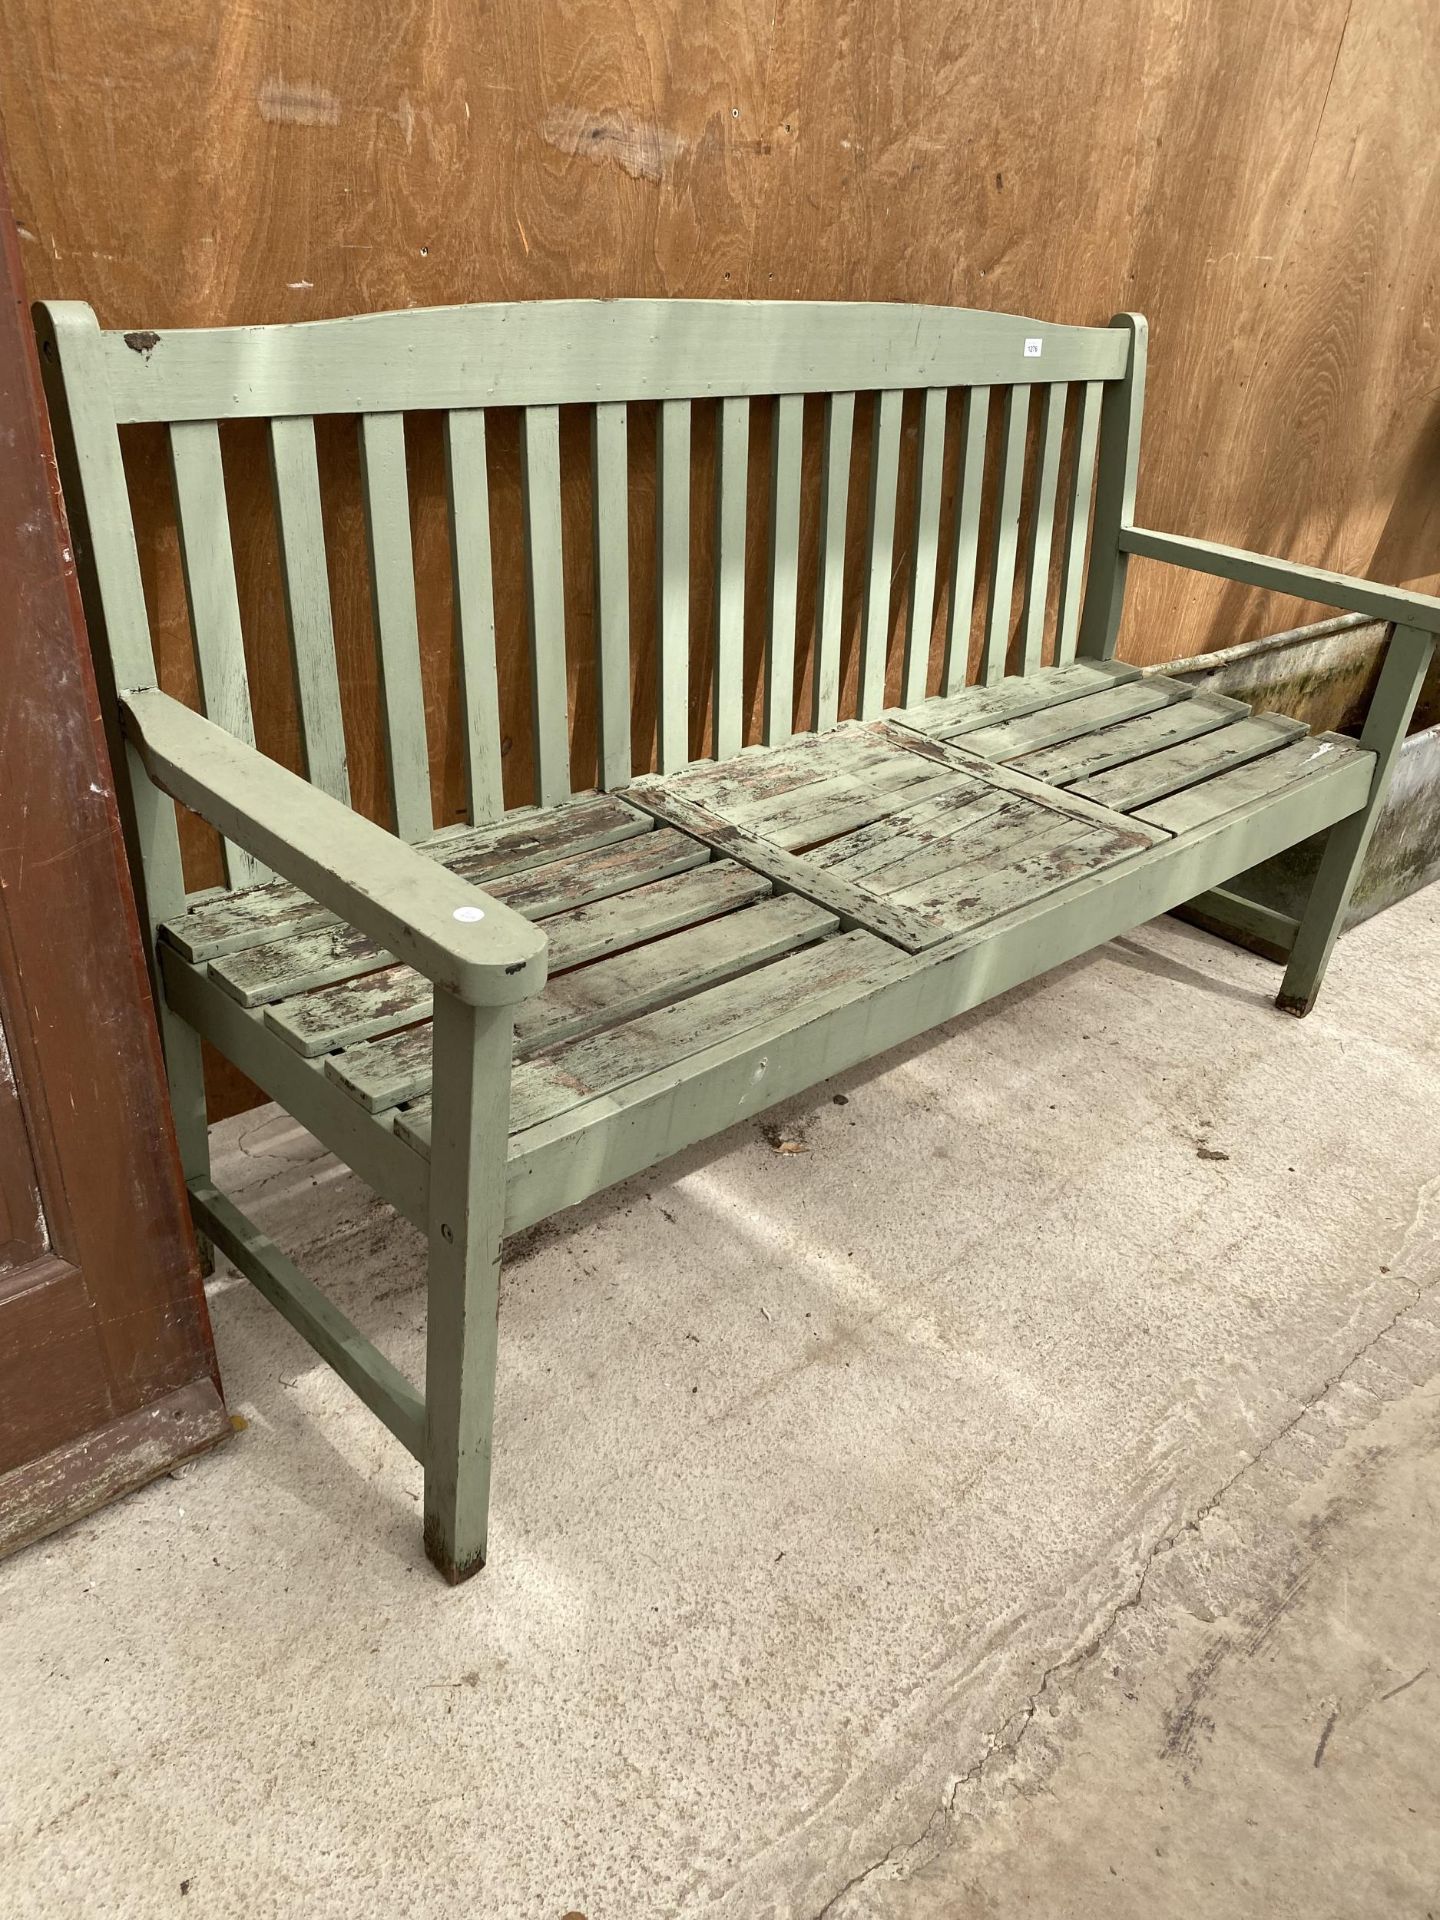 A WOODEN SLATTED GARDEN BENCH - Image 2 of 3